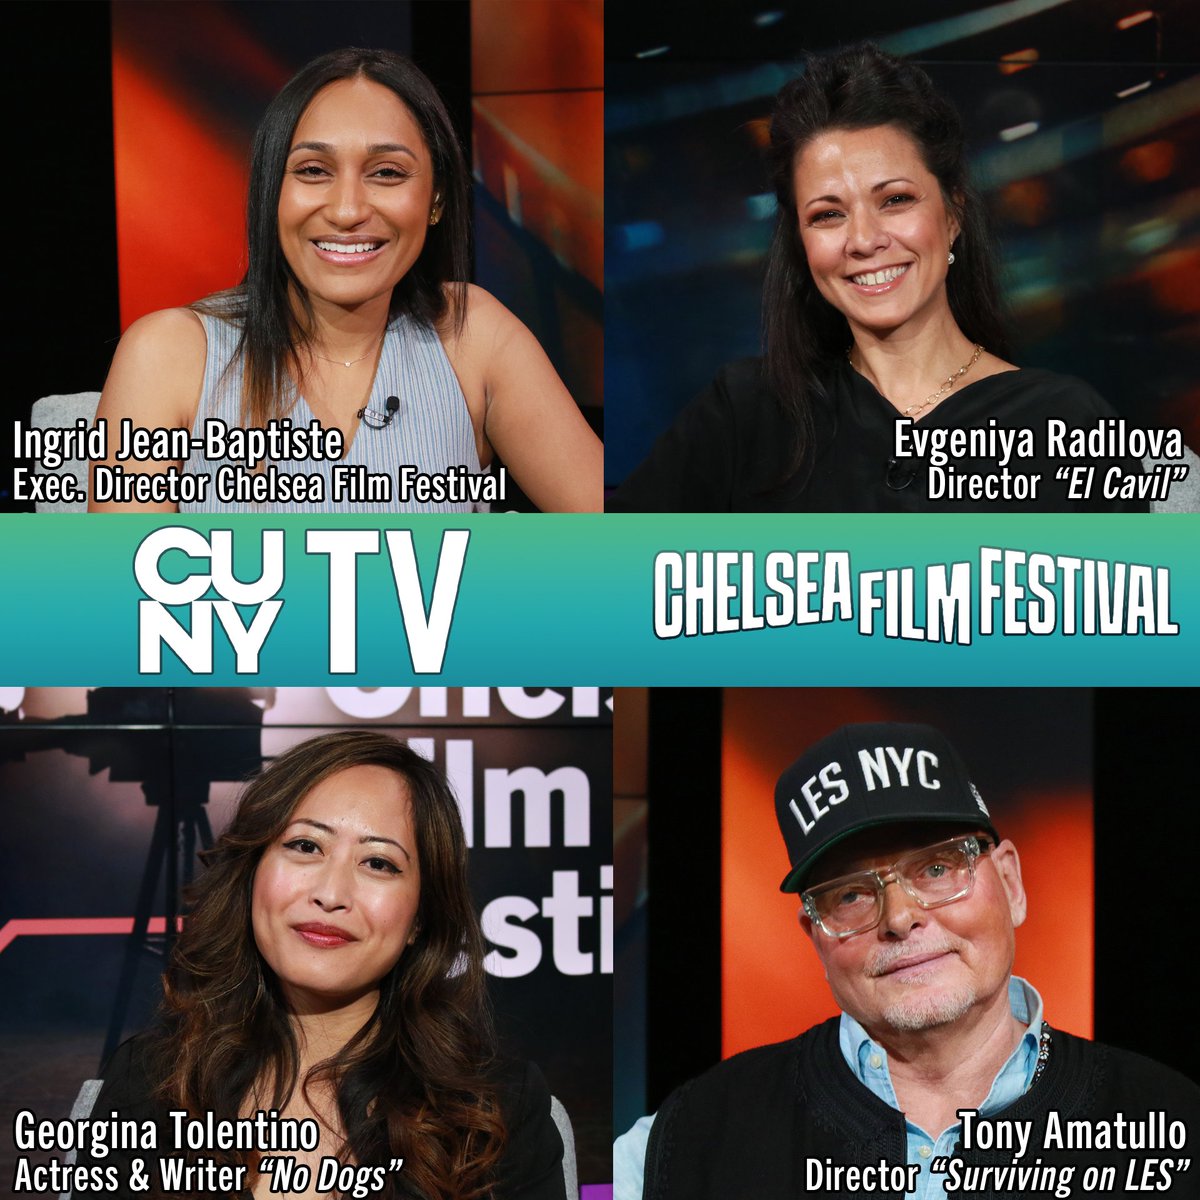 📺 Broadcast your film on CUNY TV! 🎥 @chelseafilm festival’s partnership with #CUNYTV Presents offers all CFF alumni an opportunity to broadcast their film! ✍️ Free submission until 04/15 bit.ly/cffxcunytv